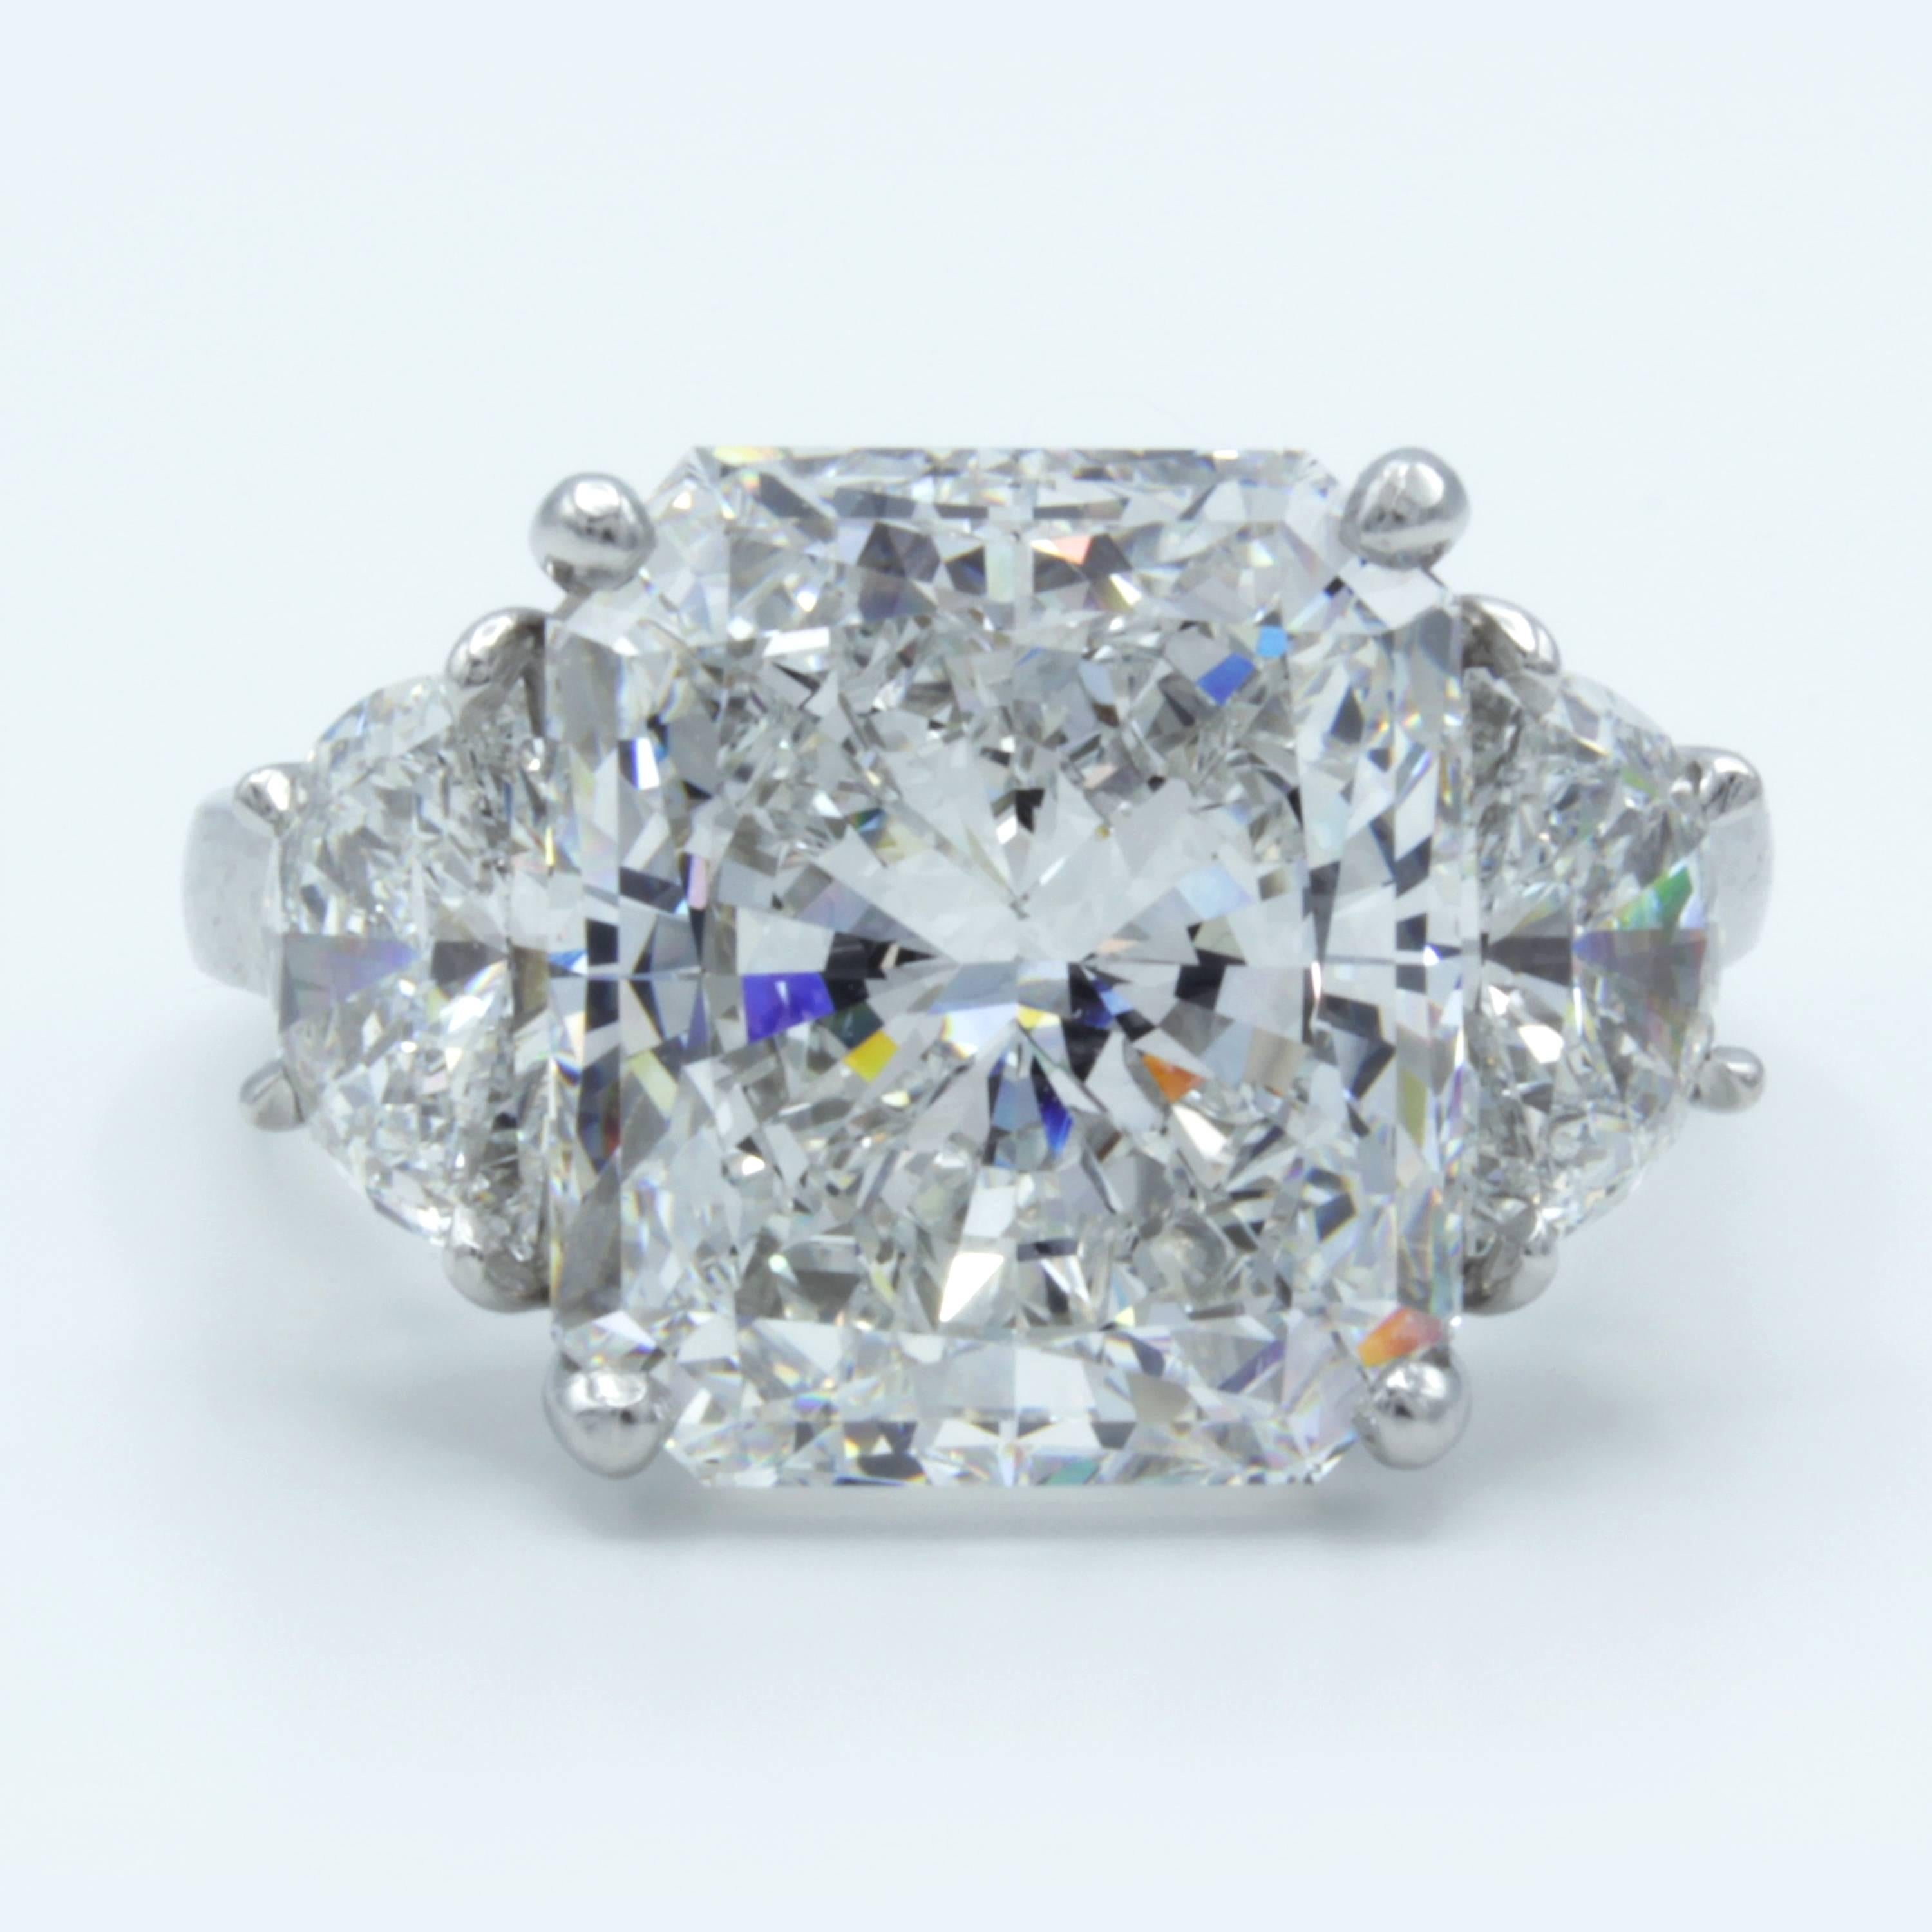 A Rosenberg Diamonds & Co. GIA certified 7.11 carat radiant cut diamond reveals swathes of prismatic color in a range of fiery flashes from within a setting of bright platinum. At both sides rest gleaming half-moon side stones of otherworldly